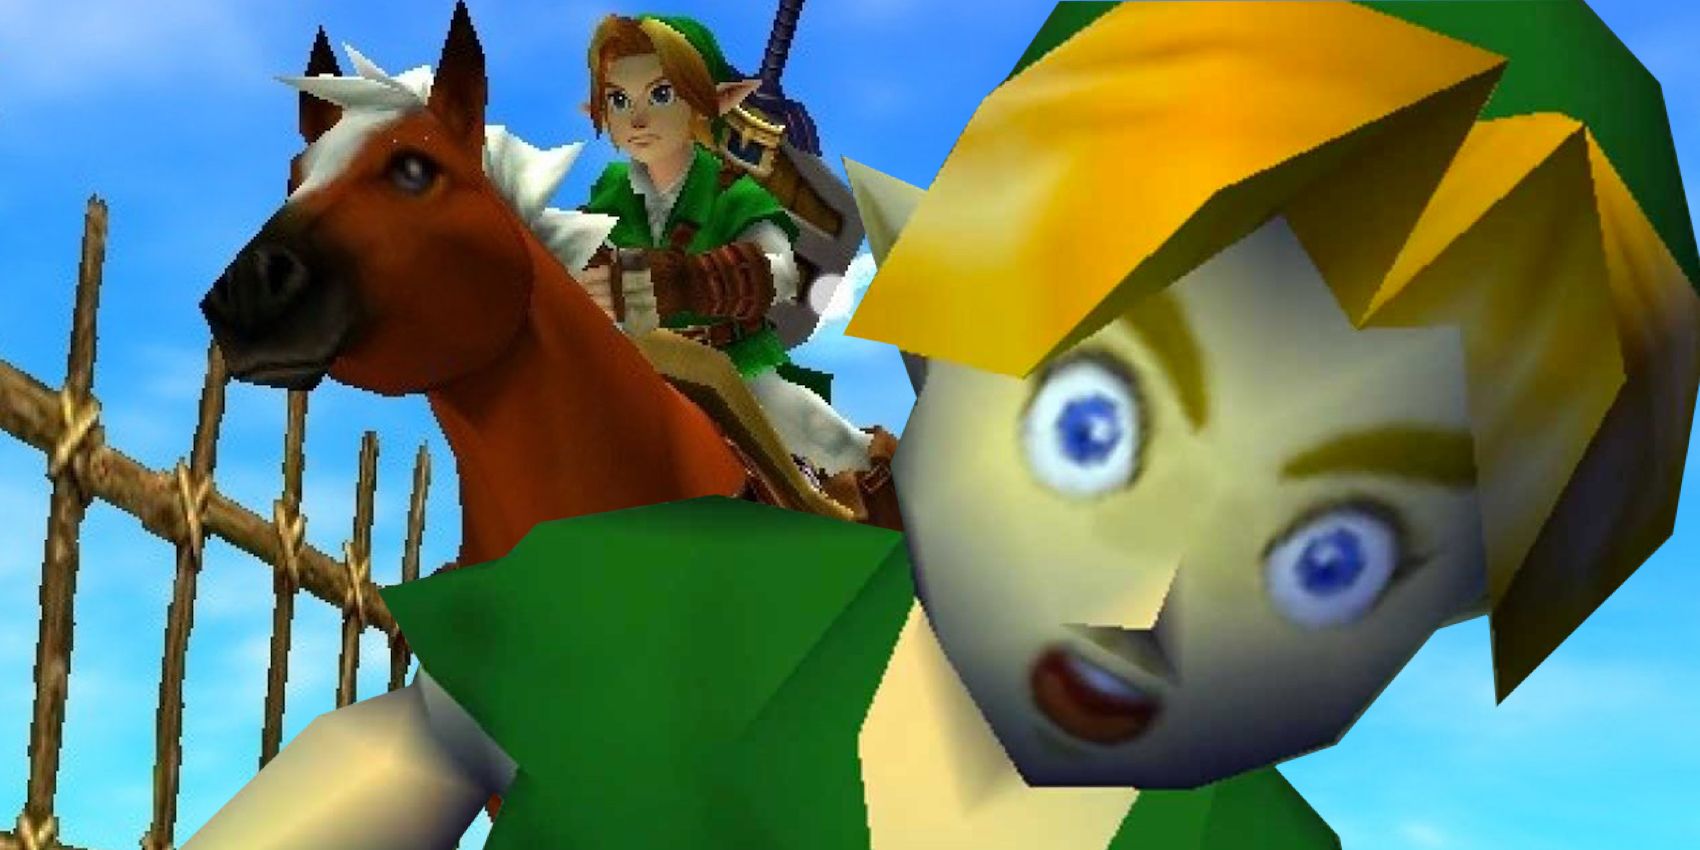 Epona the horse and Link in The Legend of Zelda Ocarina.